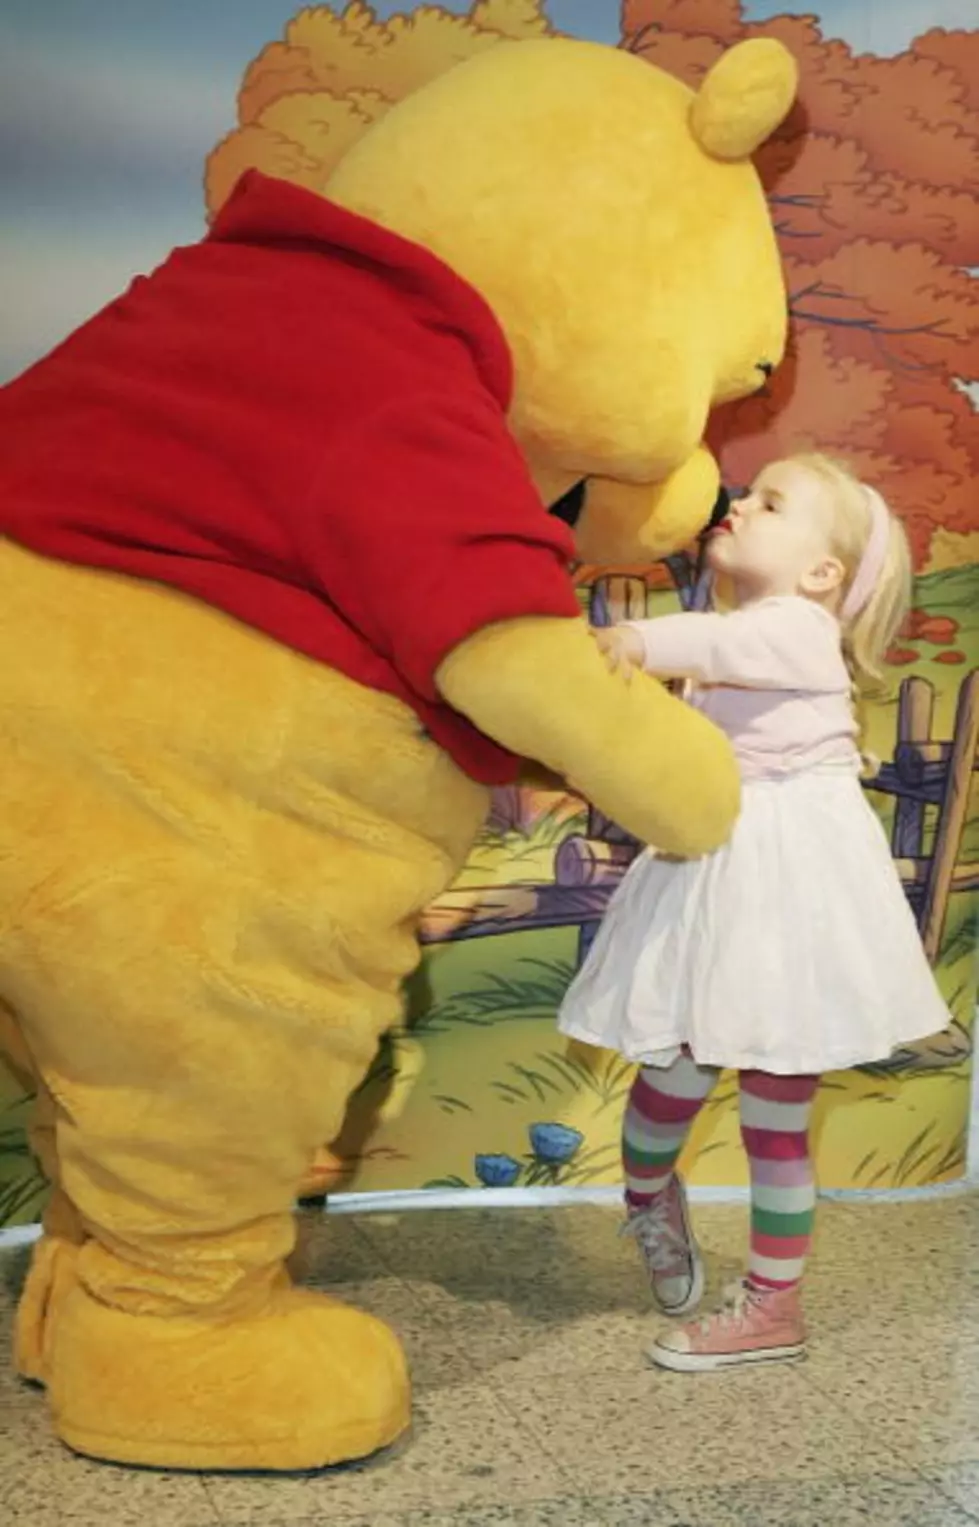 What Was “Winnie The Pooh” Named After?